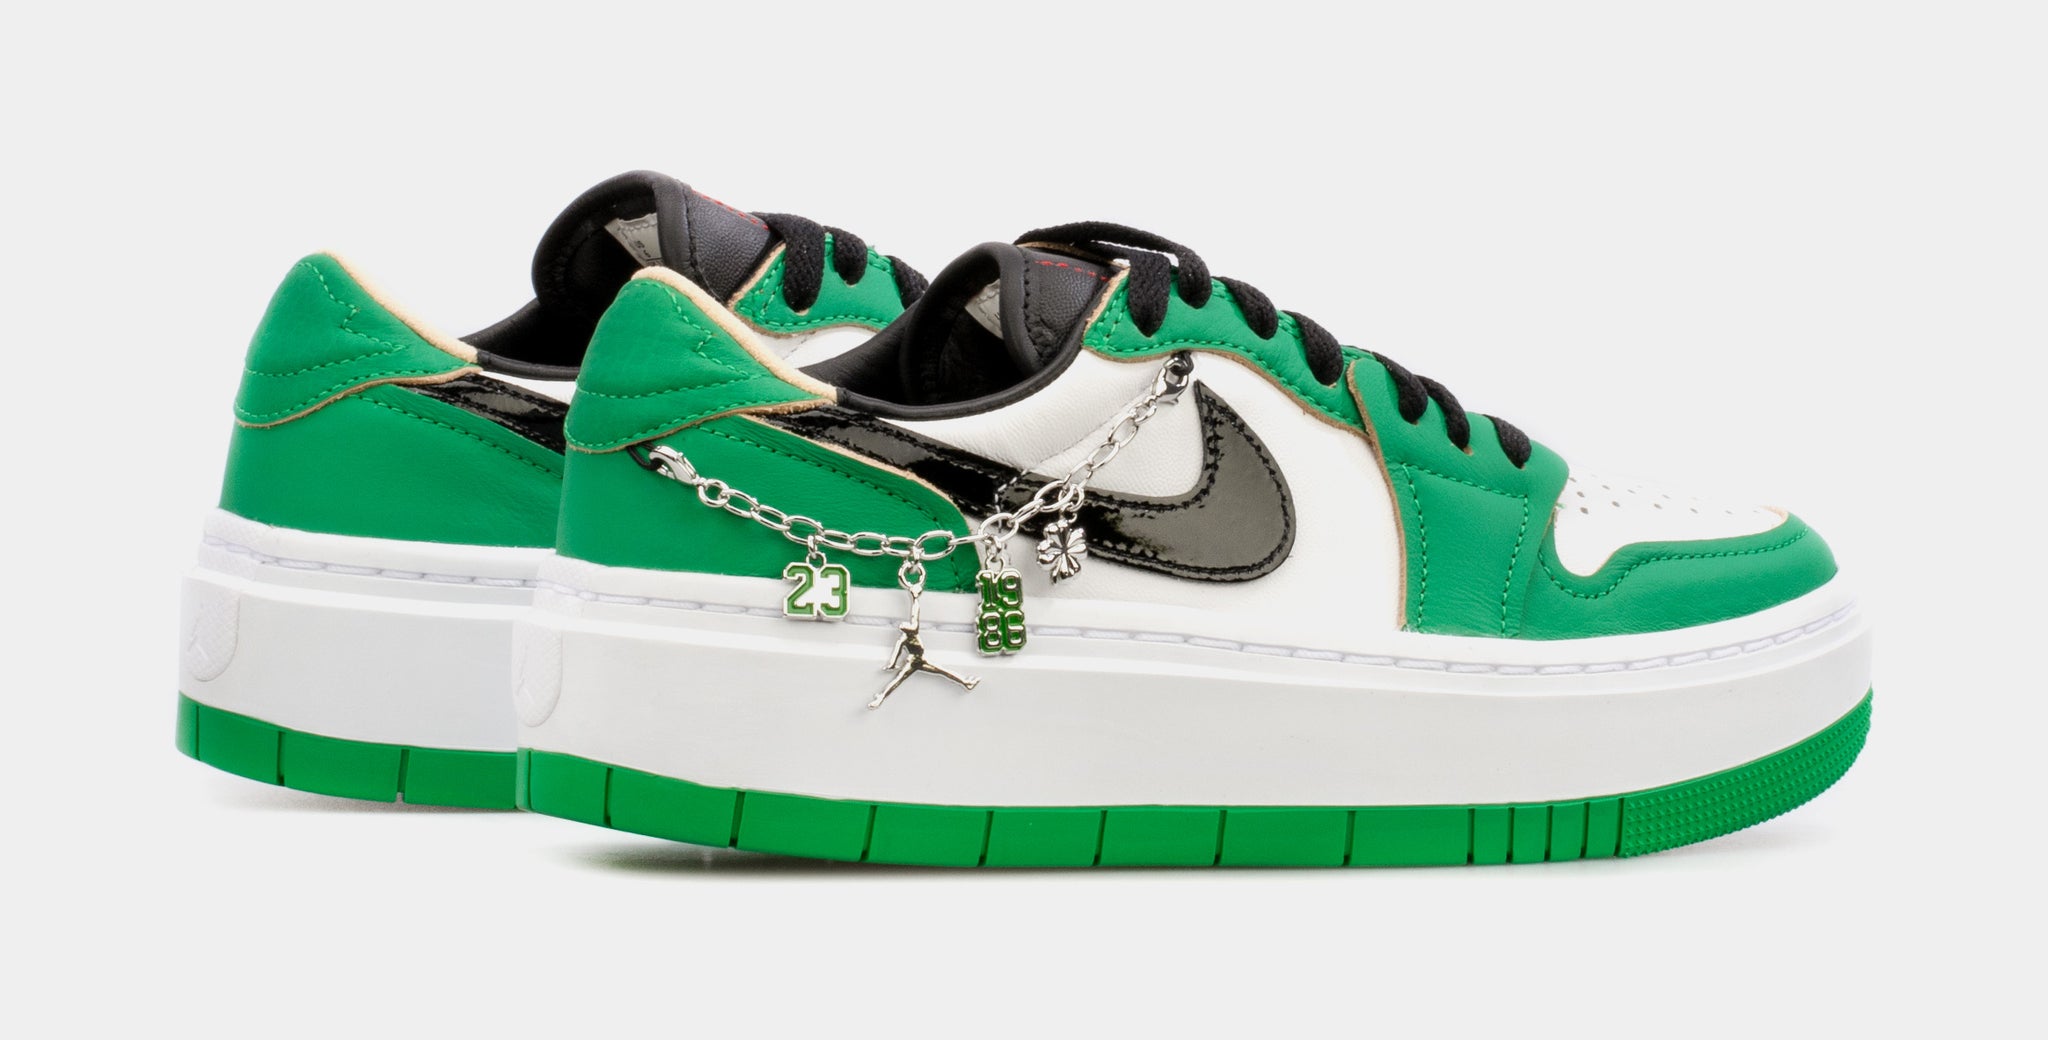 Air Jordan 1 Elevate Low Lucky Green Womens Lifestyle Shoes Green/White